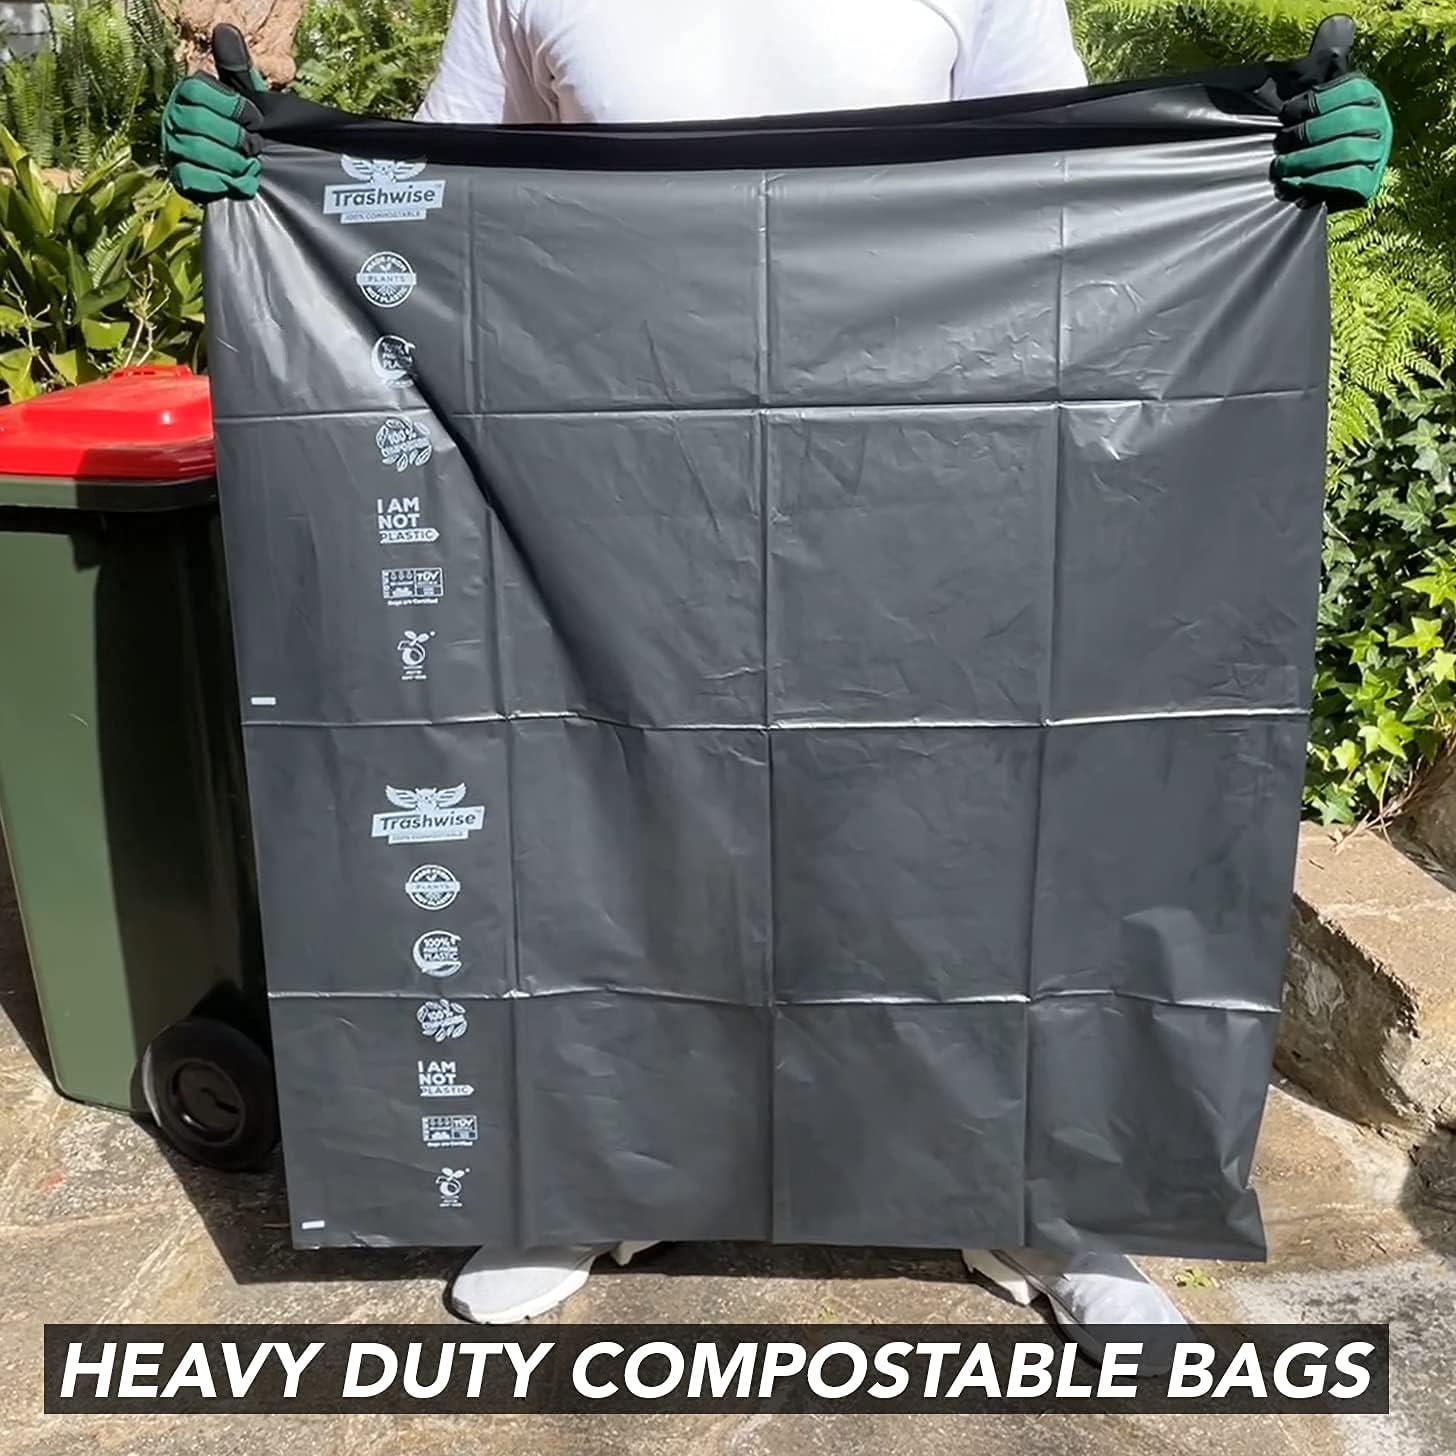 TRASHWISE 42 Gallon 100% Compostable Trash Bags Heavy Duty 3mils, Large  Contractor Bags 12 Count, Yard Lawn Leaf Paper or Household Waste, Eco &  Earth Friendly Garbage Bag Certified OK to Compost